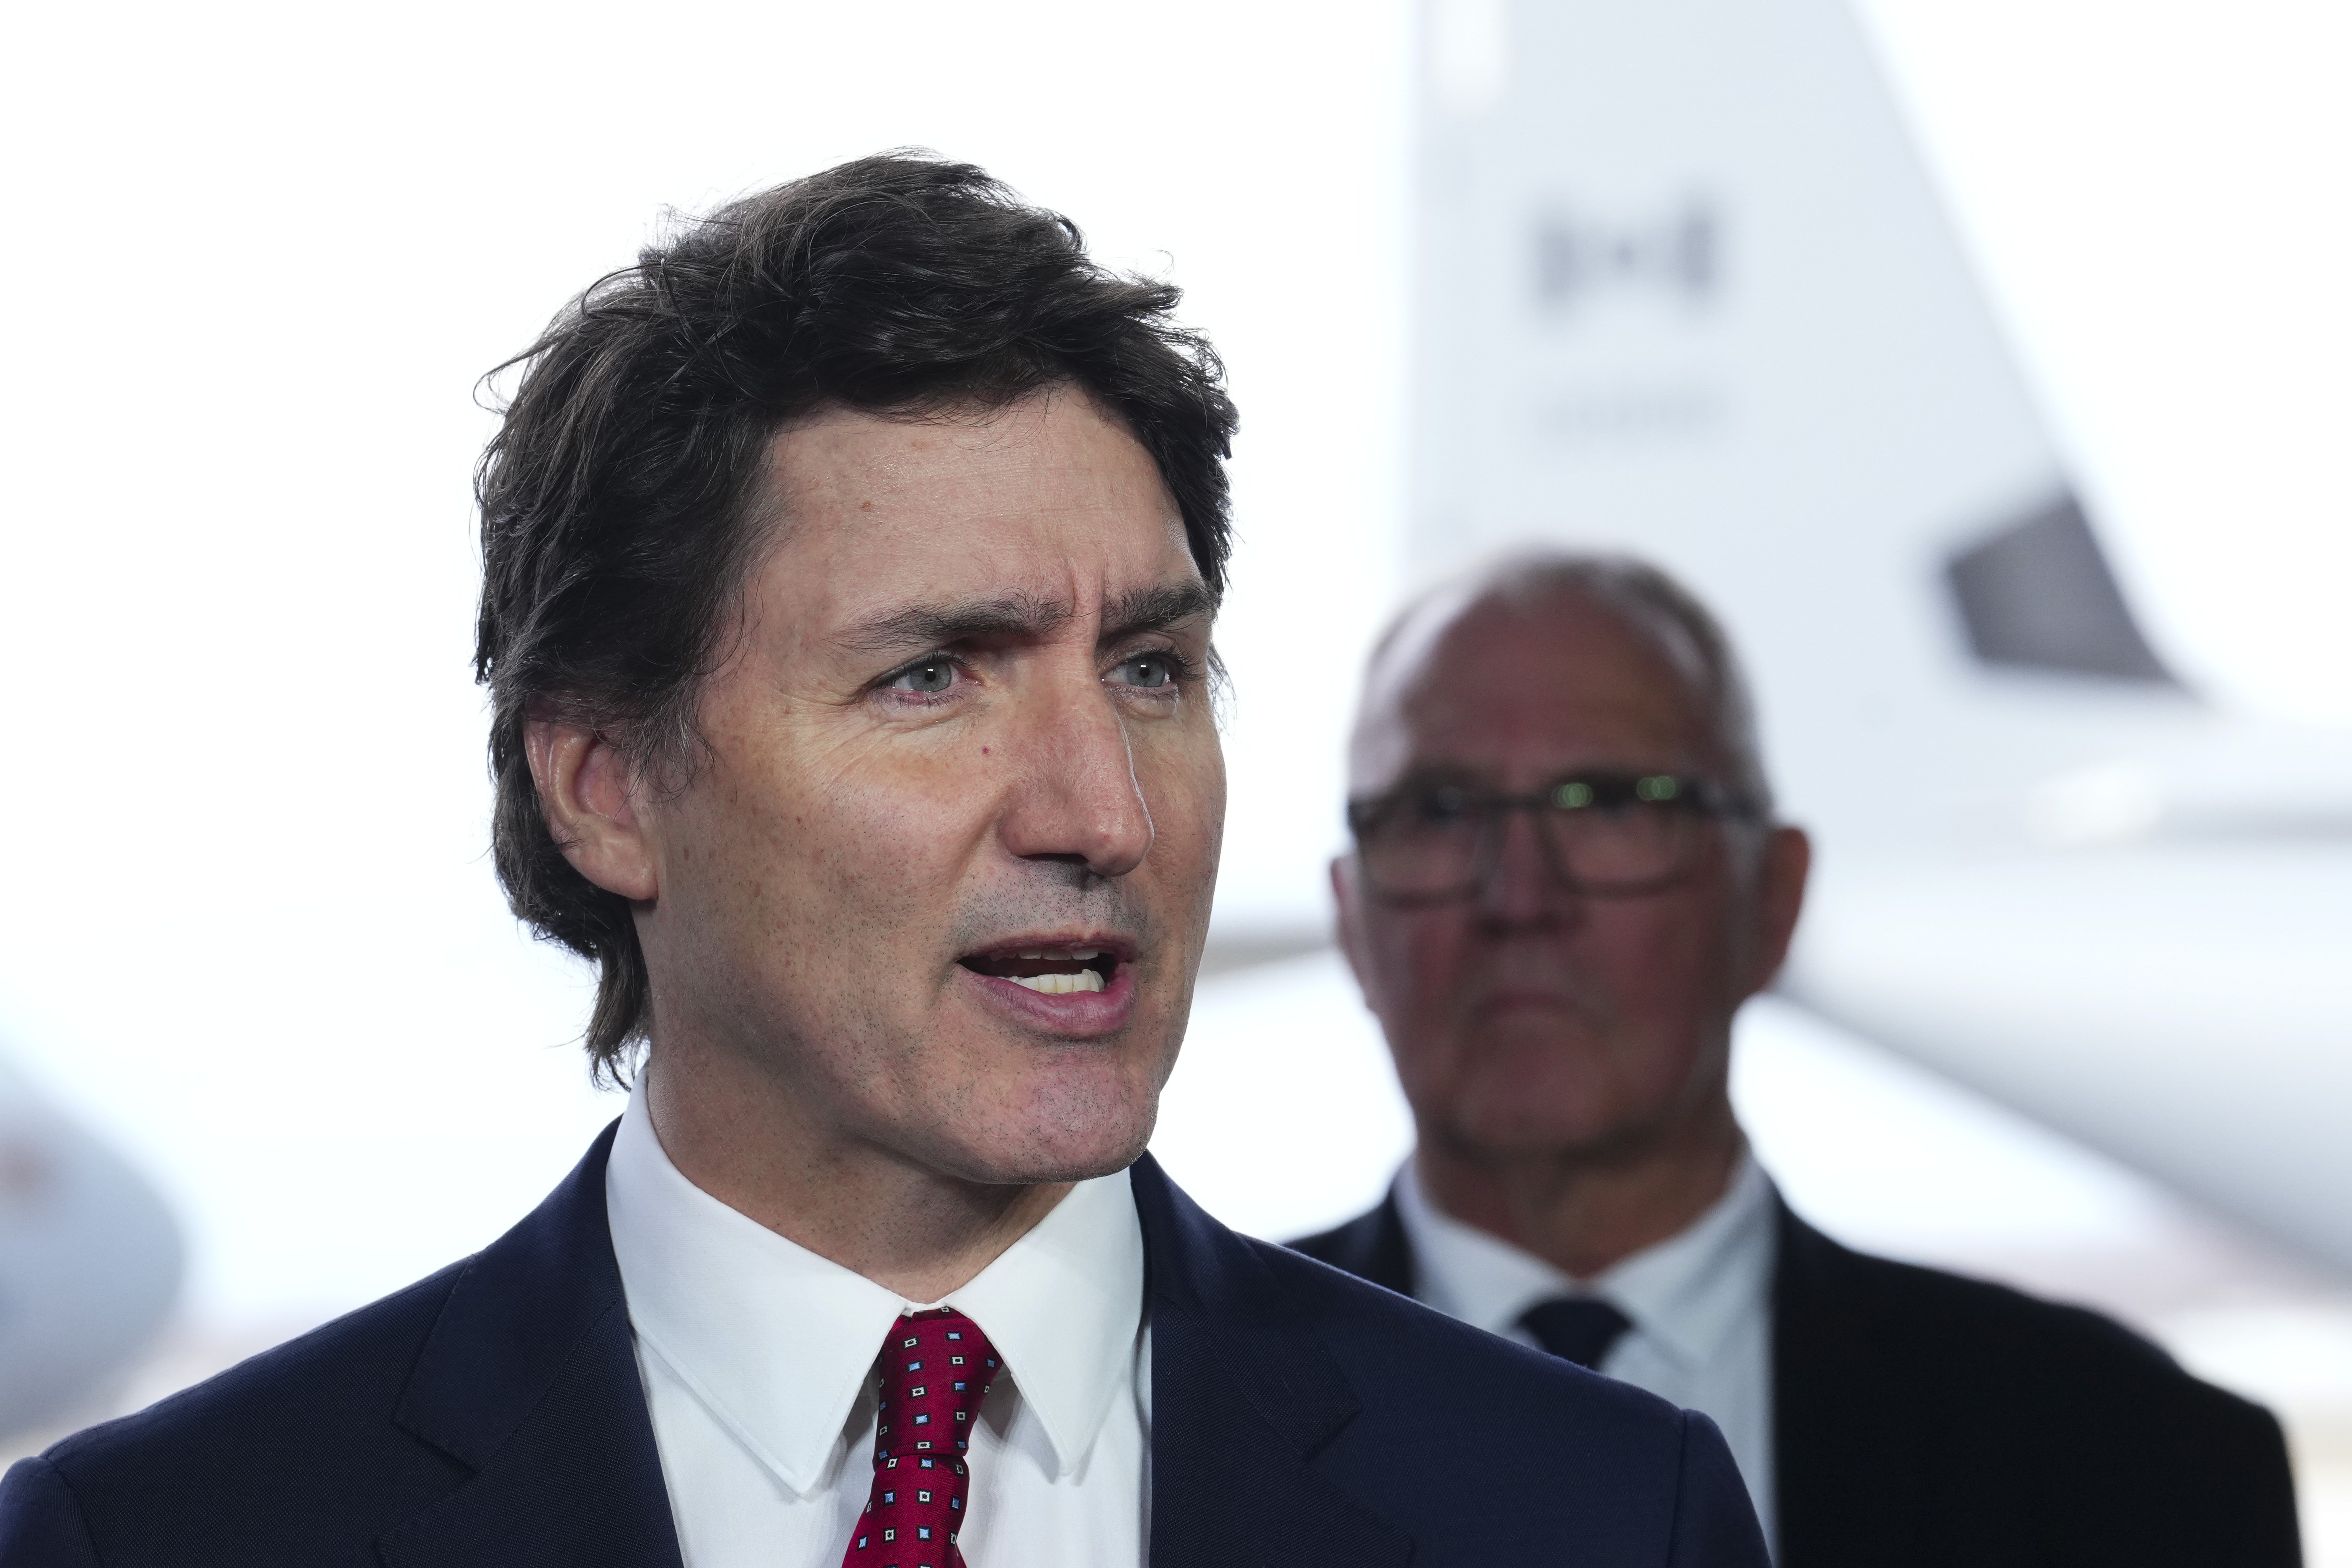 Canada exploring possibility of joining AUKUS alliance, Trudeau says